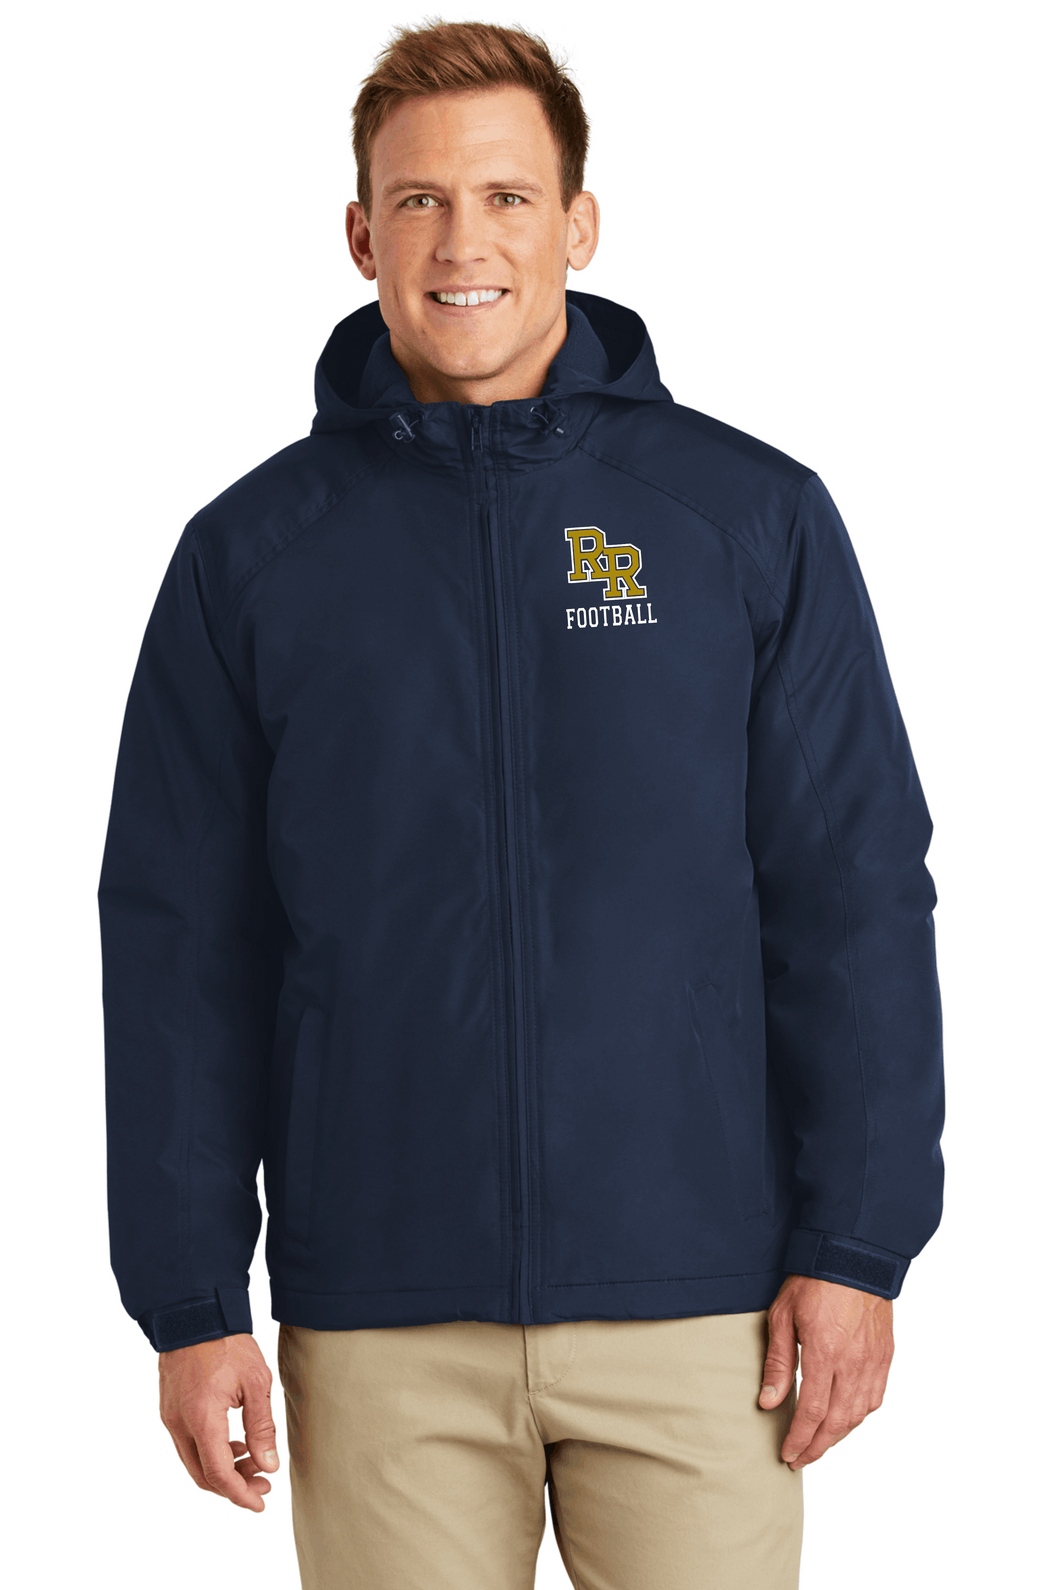 RR-FB-371-1 - Port Authority Hooded Charger Jacket - RR Football Logo